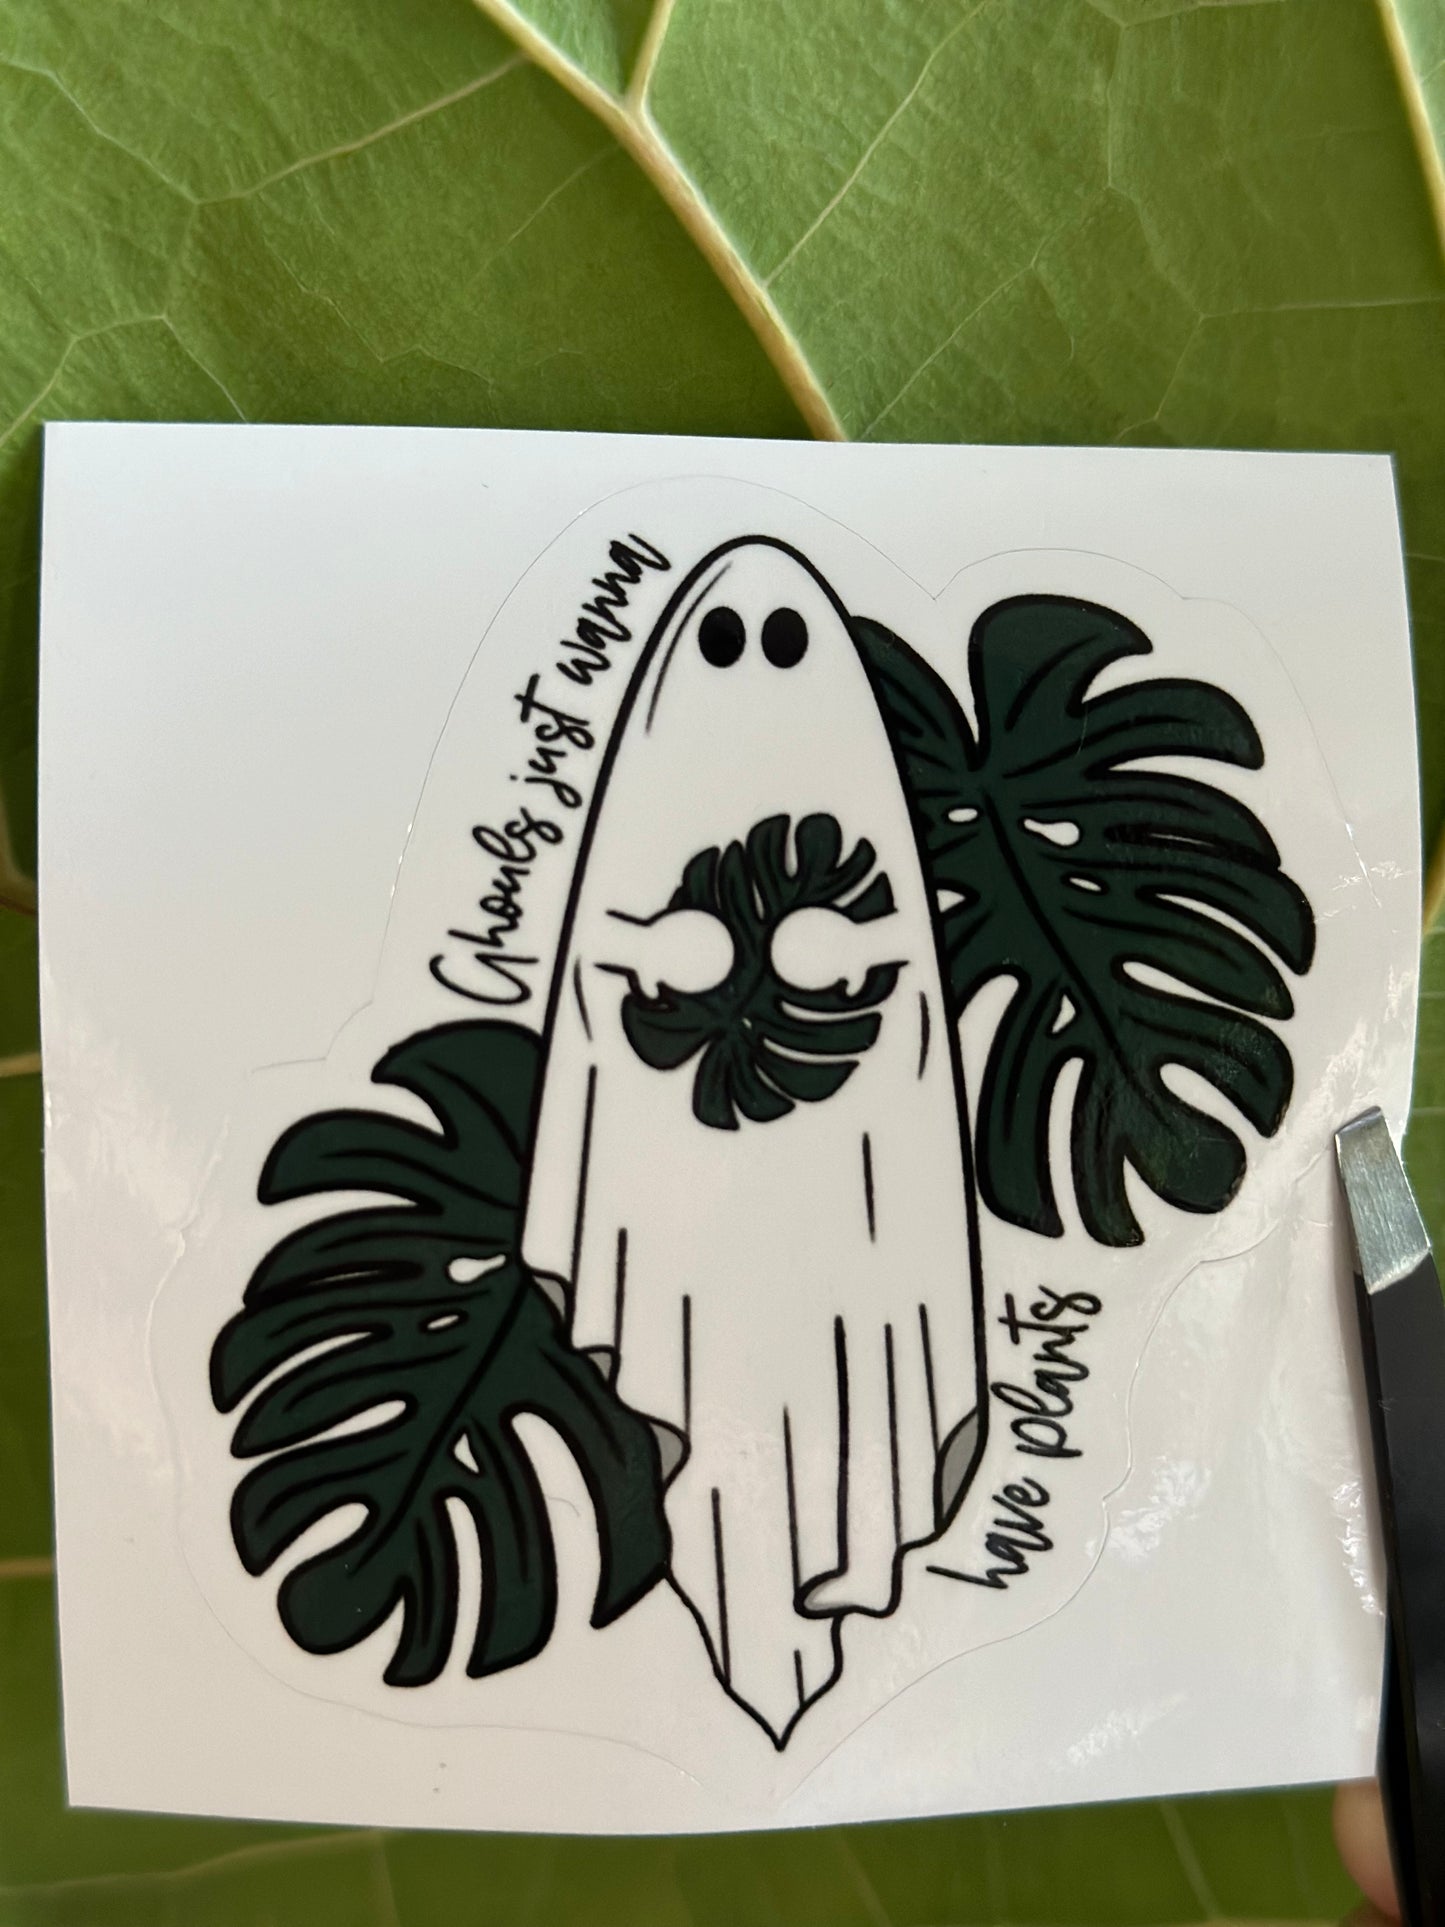 Cute ghost with monstera leaves waterproof sticker for plant lovers, plant lady, plant mama.